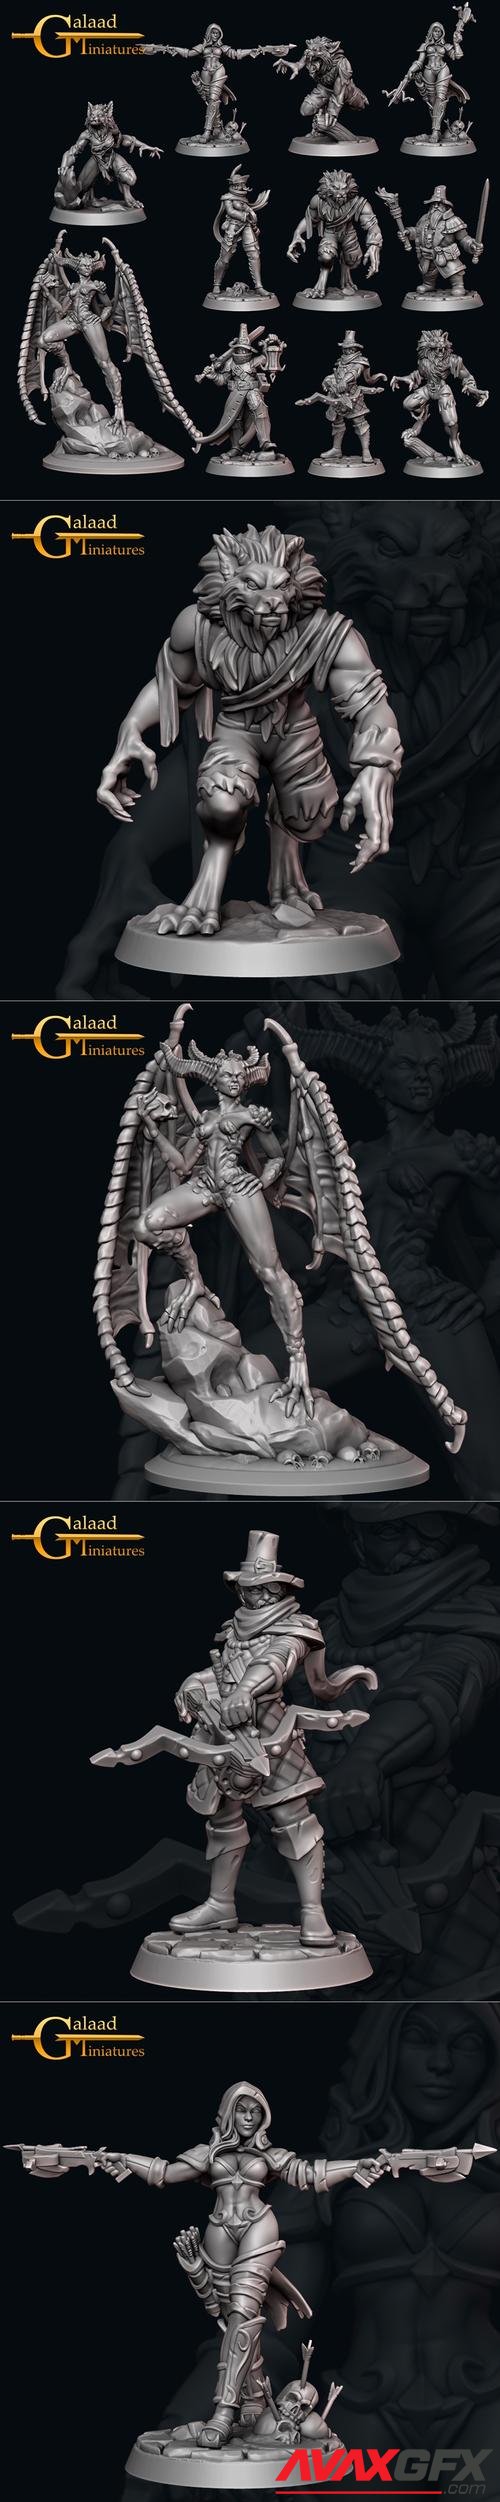 Galaad Miniatures - Hunters and Werewolf October 2022 – 3D Print